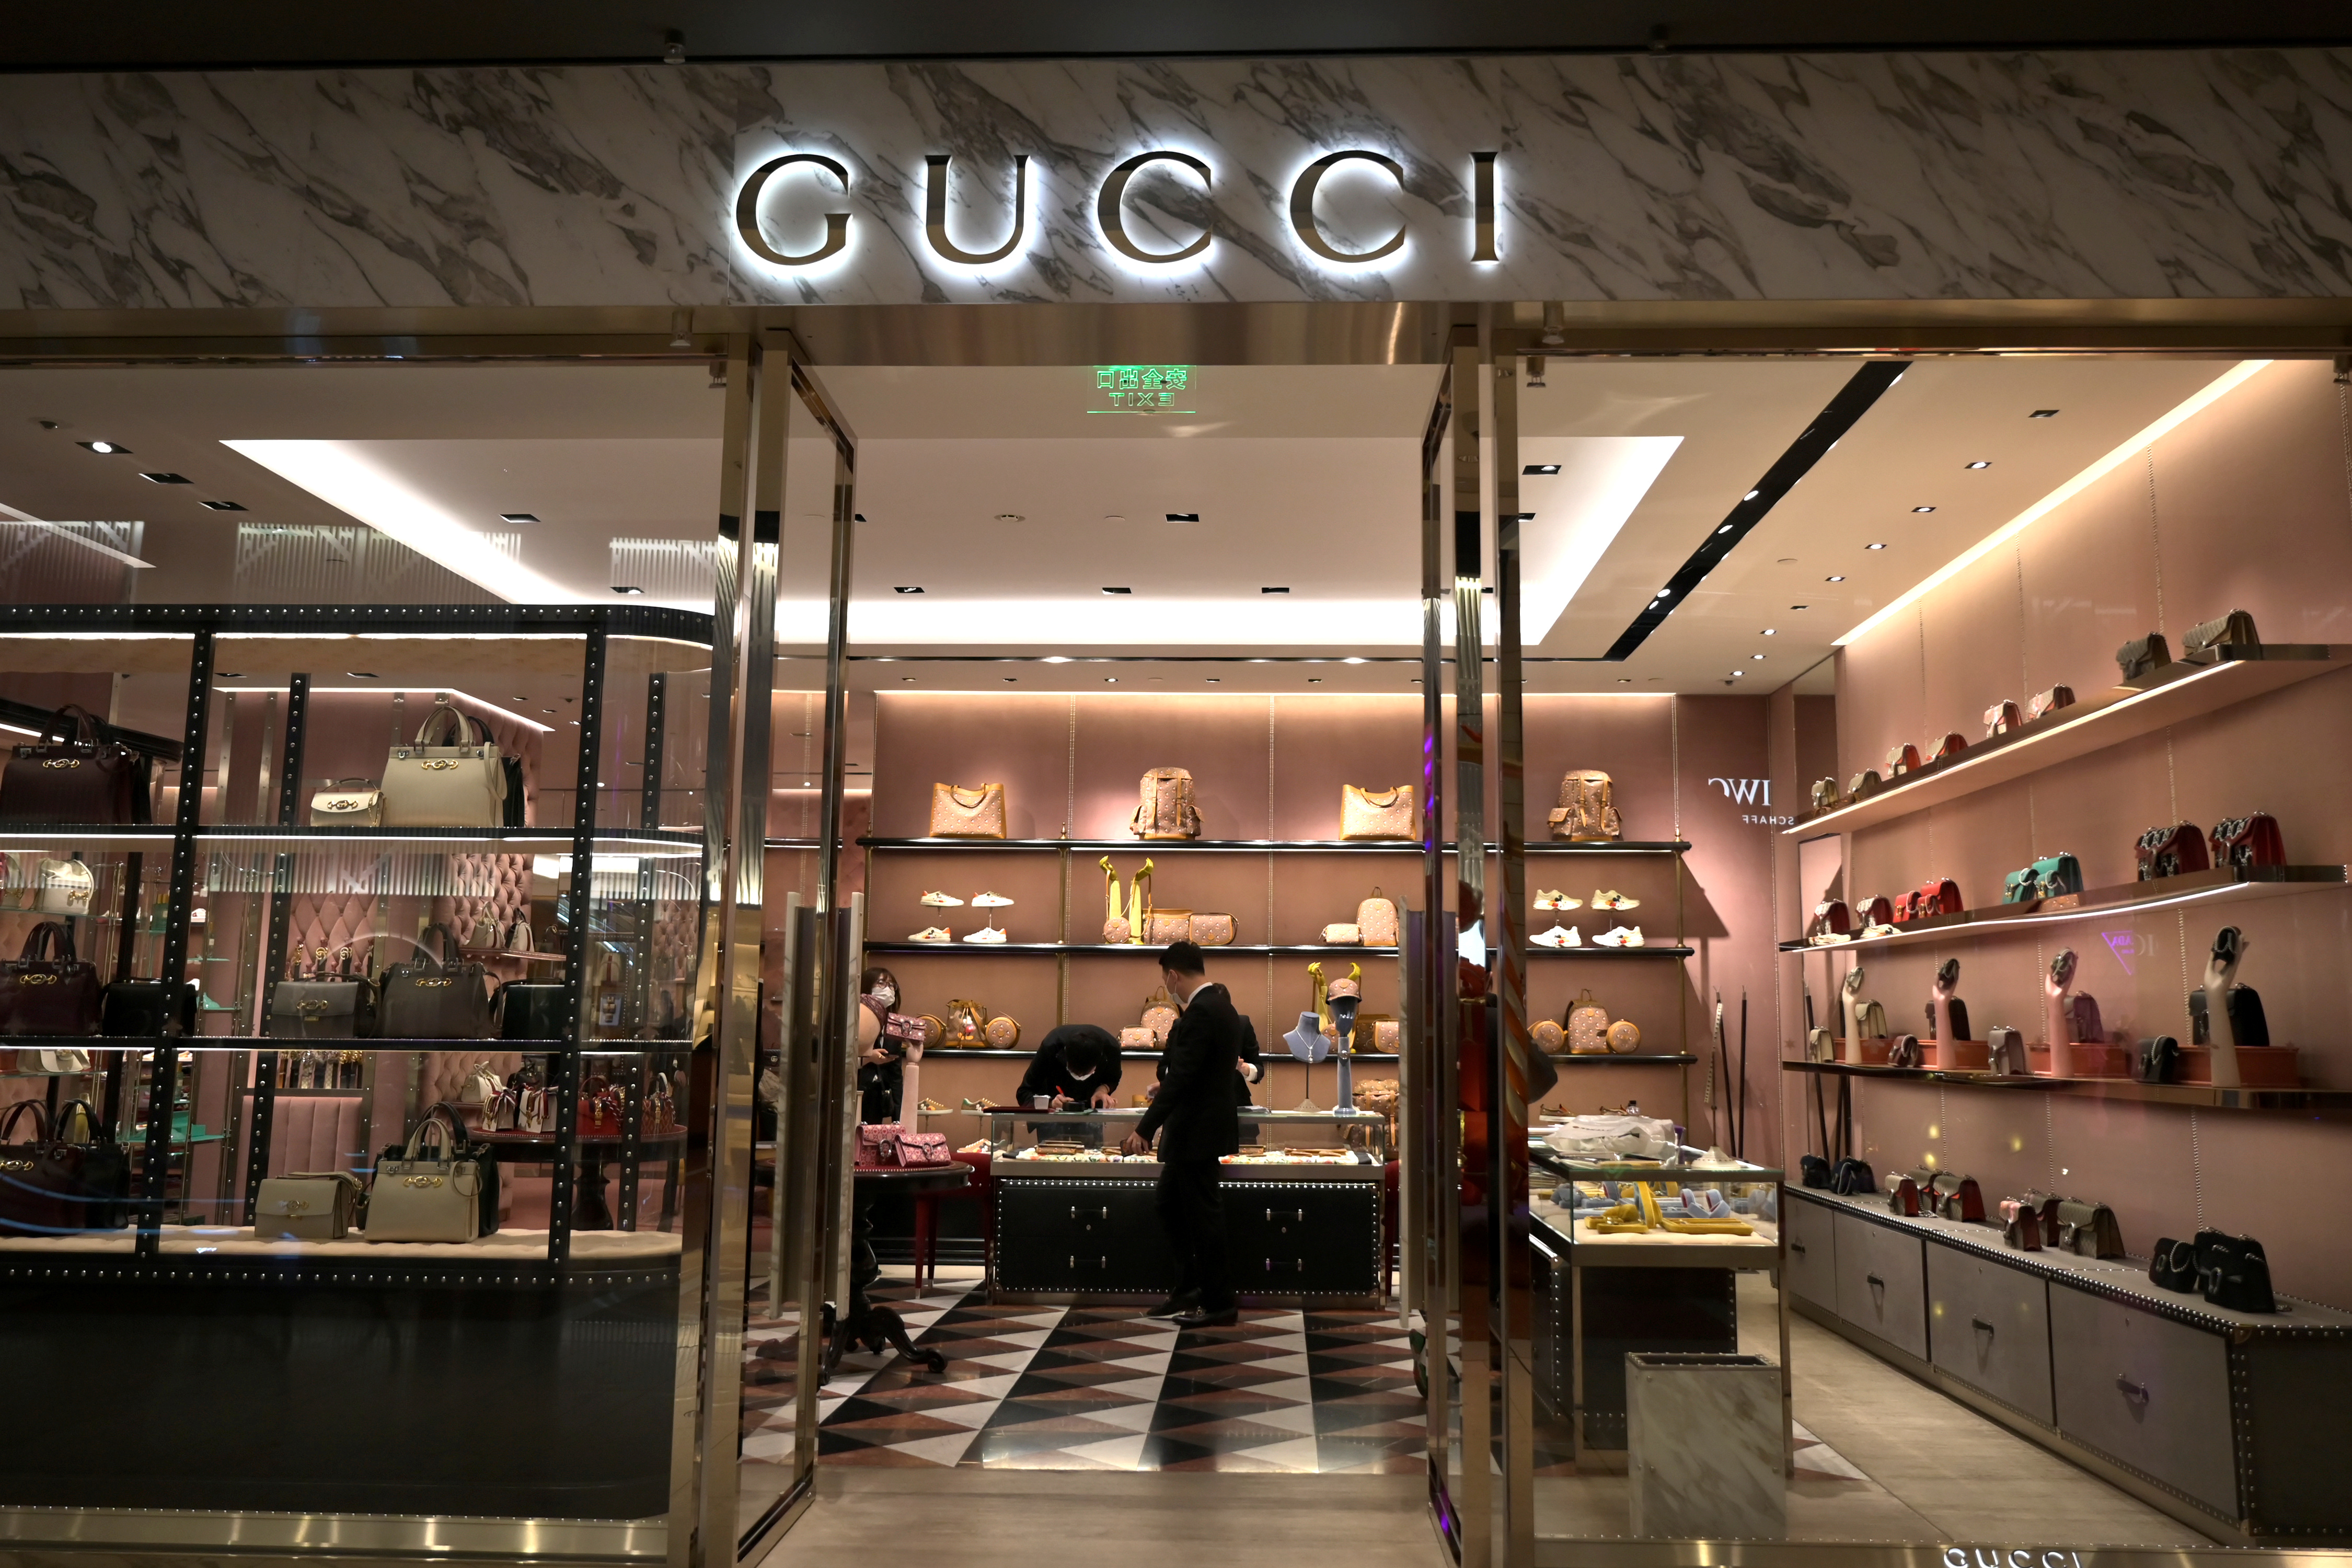 Staff members wearing face masks are seen inside a store of an Italian luxury brand Gucci at a shopping mall, as the country is hit by an outbreak of the novel coronavirus, in Beijing